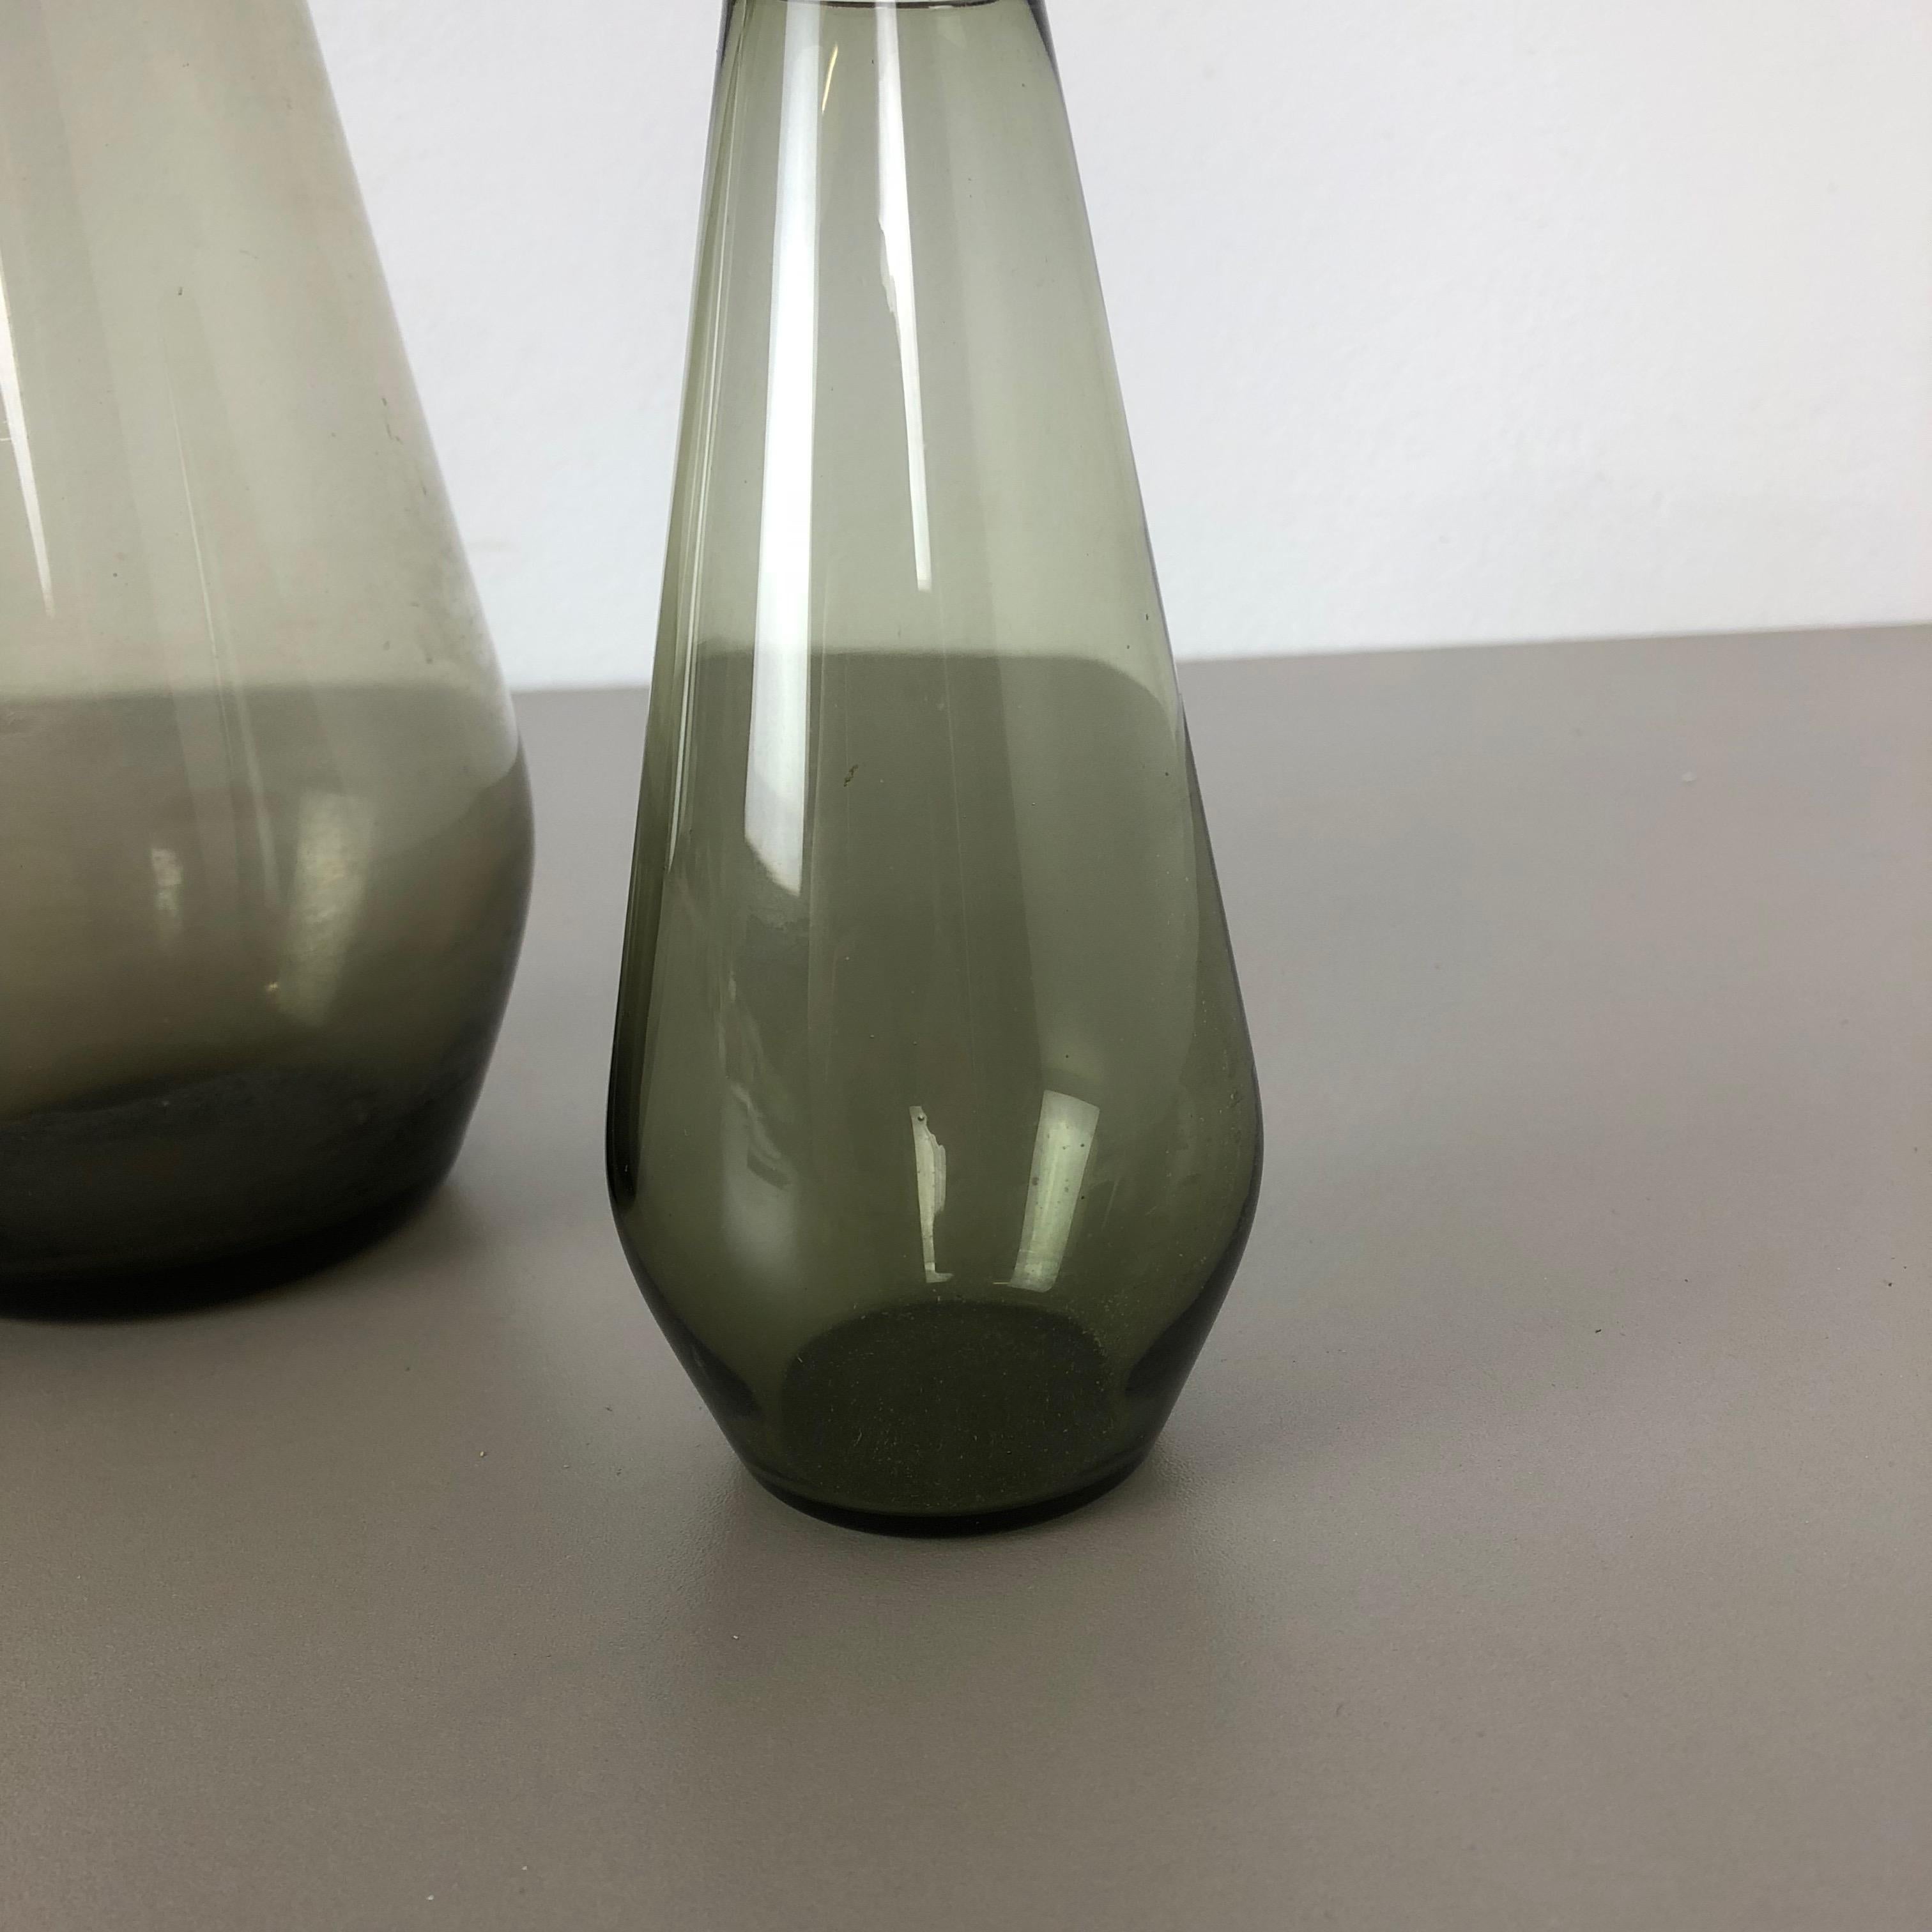 Vintage 1960s Set of 2 Turmaline Vases by Wilhelm Wagenfeld for WMF, Germany For Sale 4